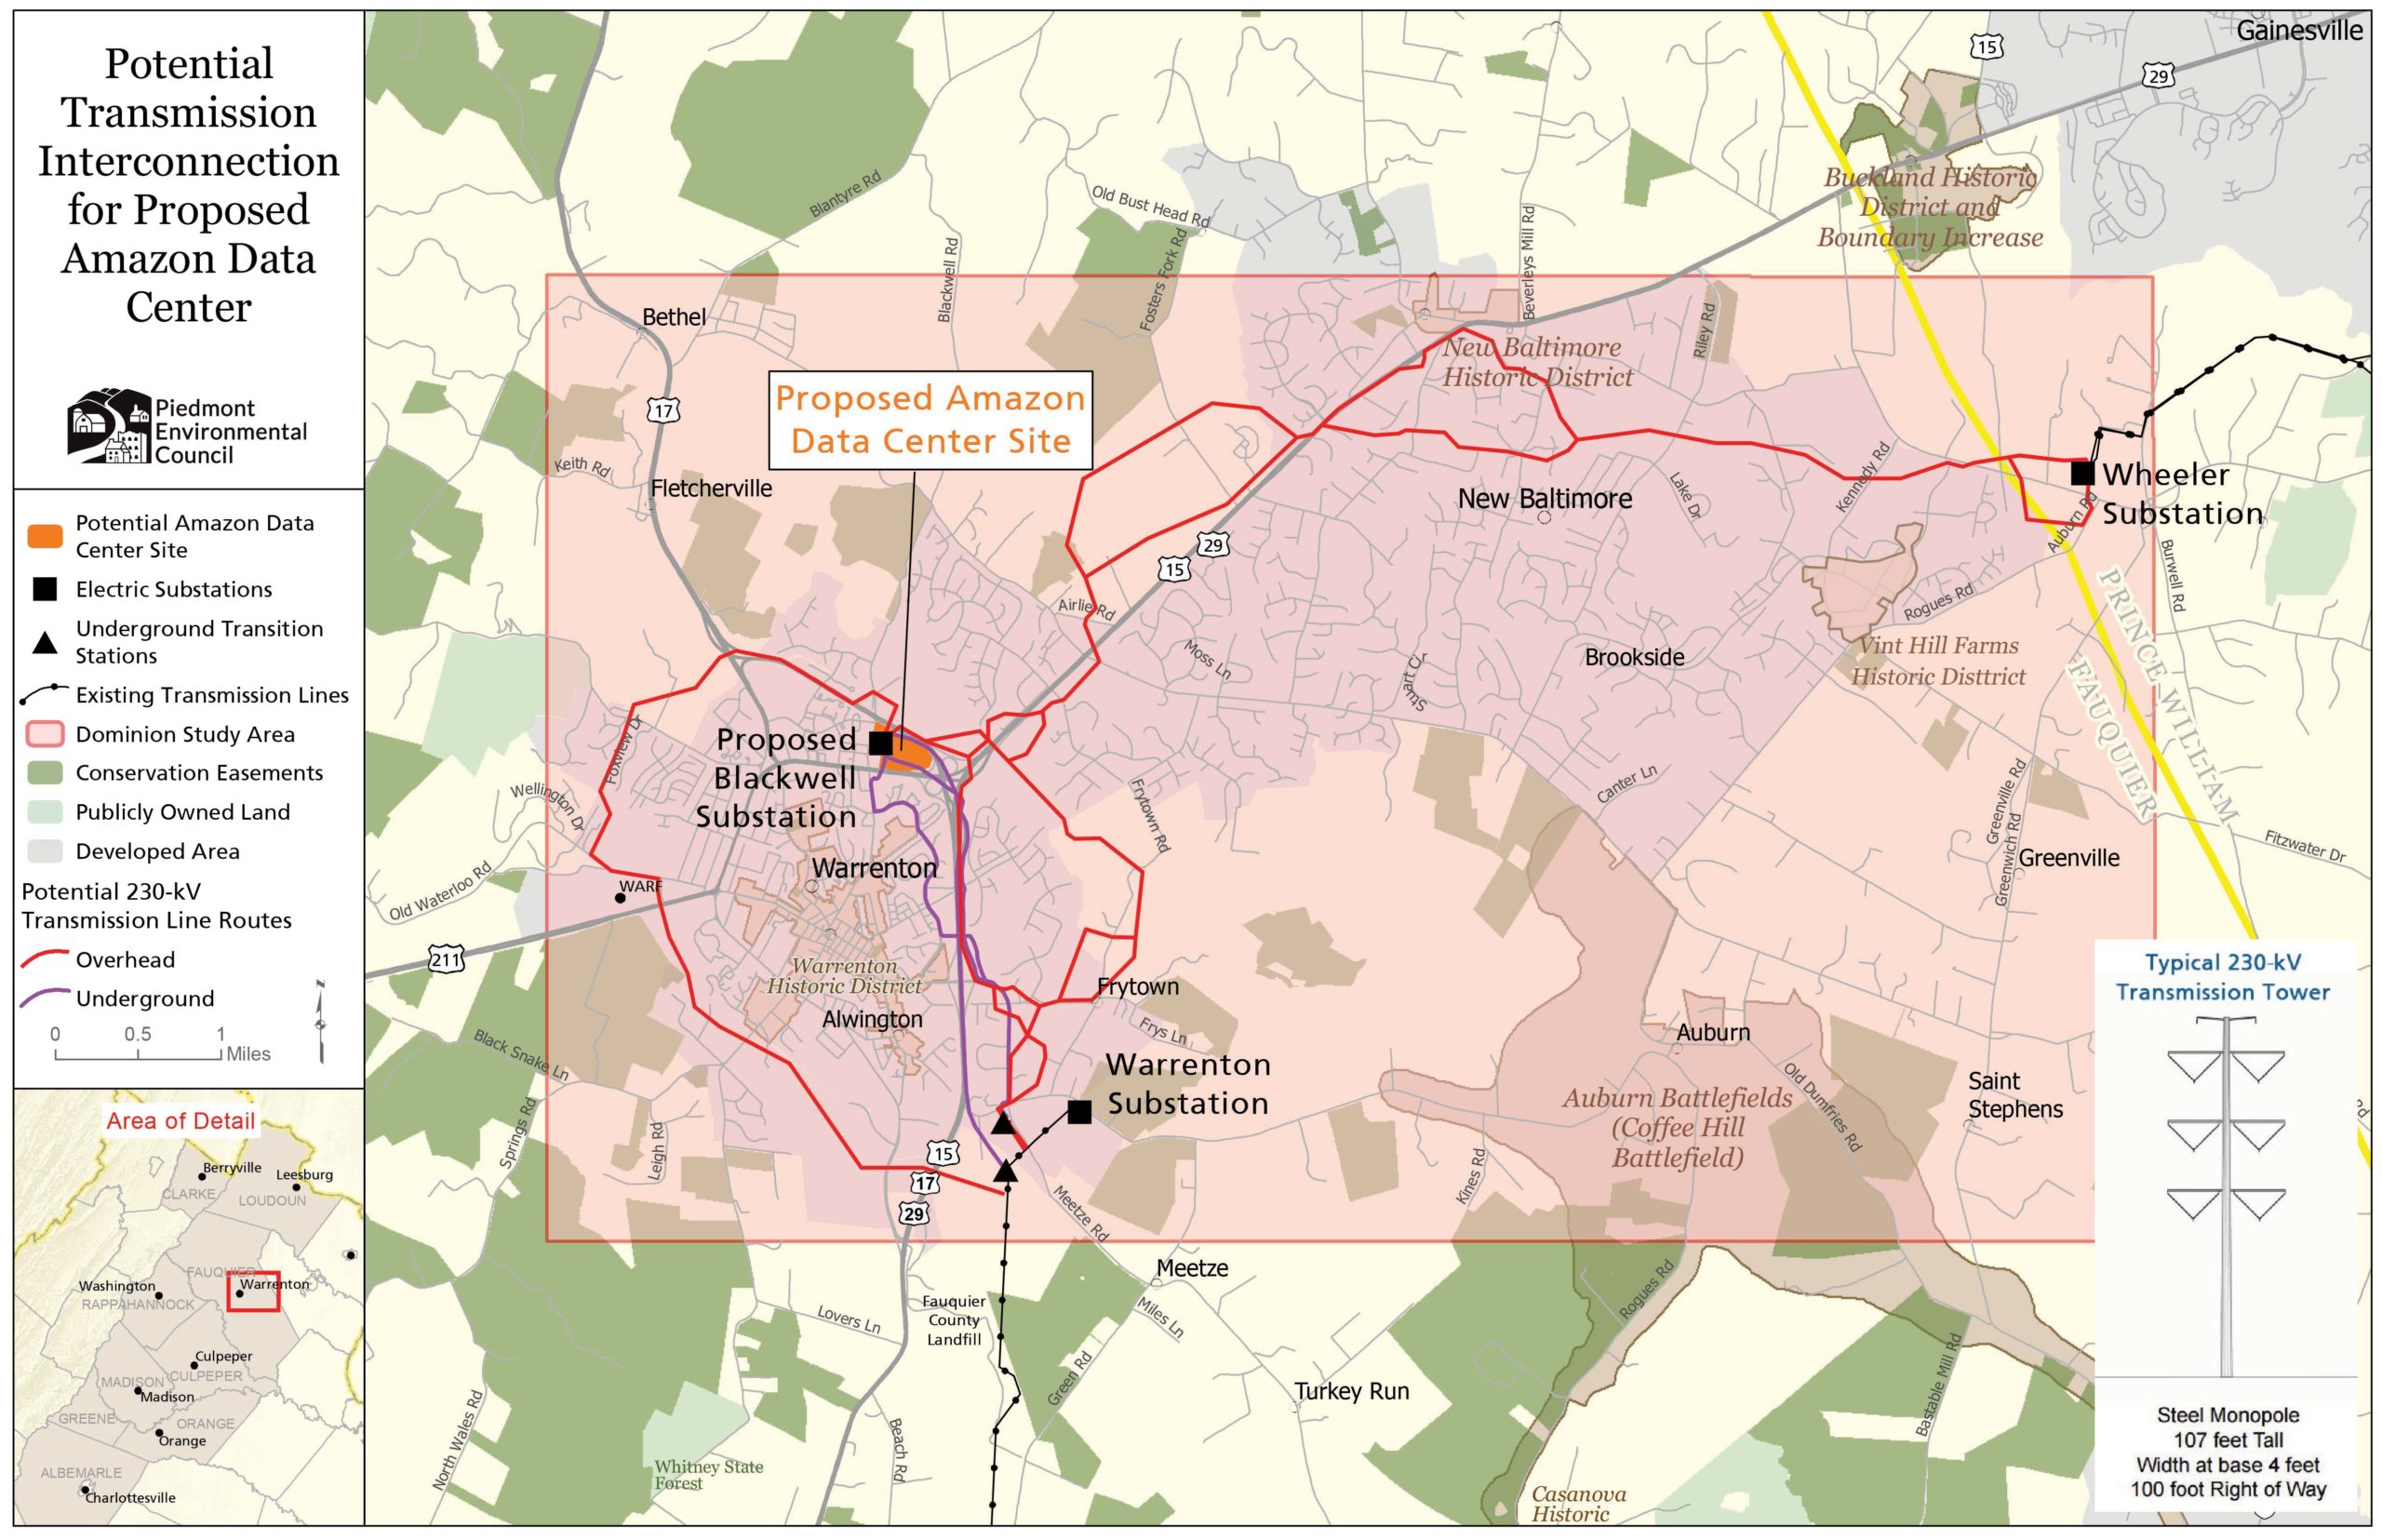 a map shows a boxed area around Warrenton, Virginia with multiple red and purple lines depicting potential transmission line routes